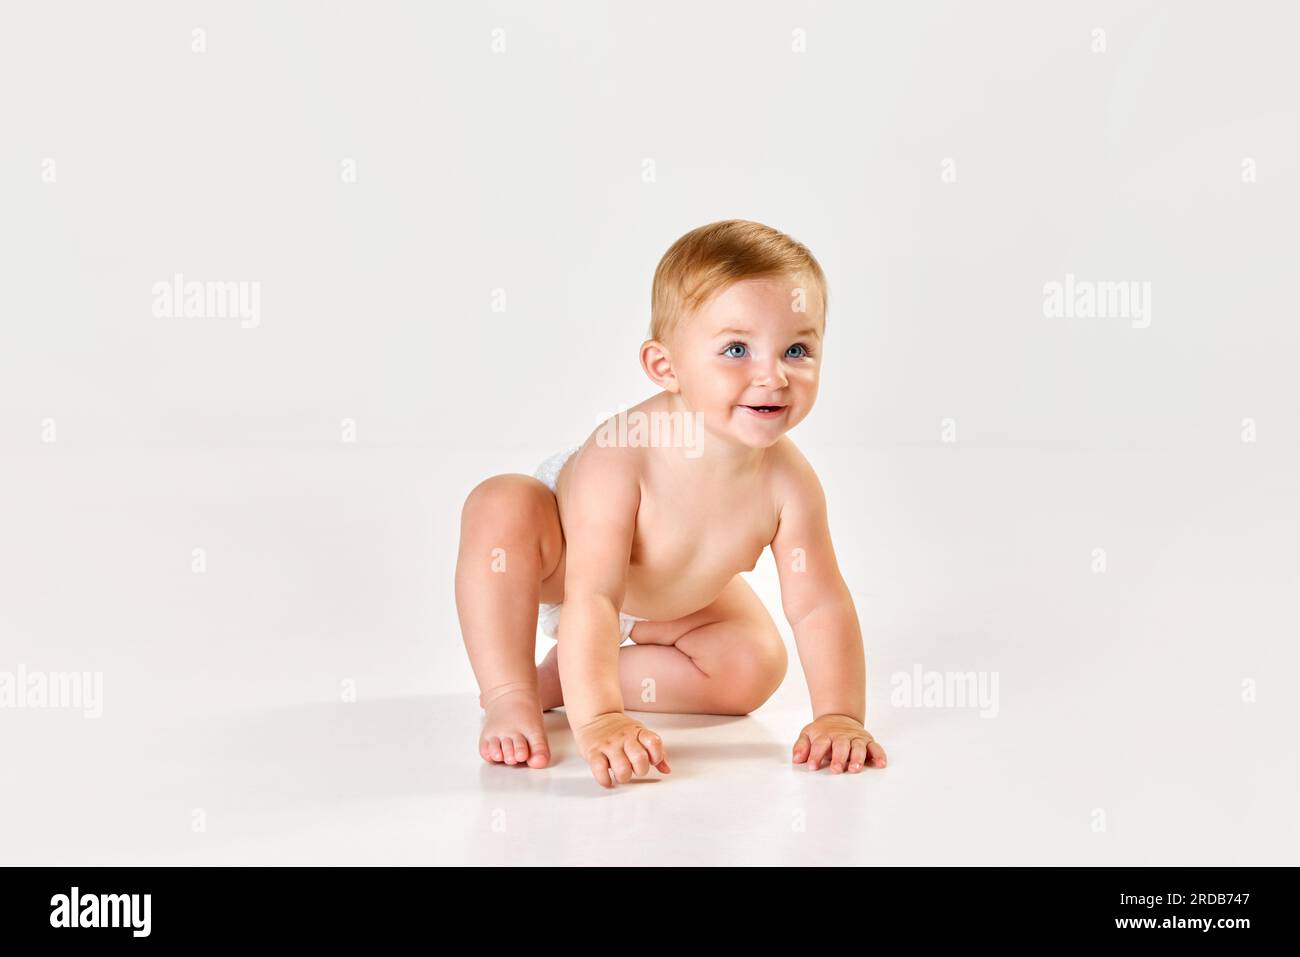 little child girl in dress sitting on the floor with confetti Stock Photo -  Alamy